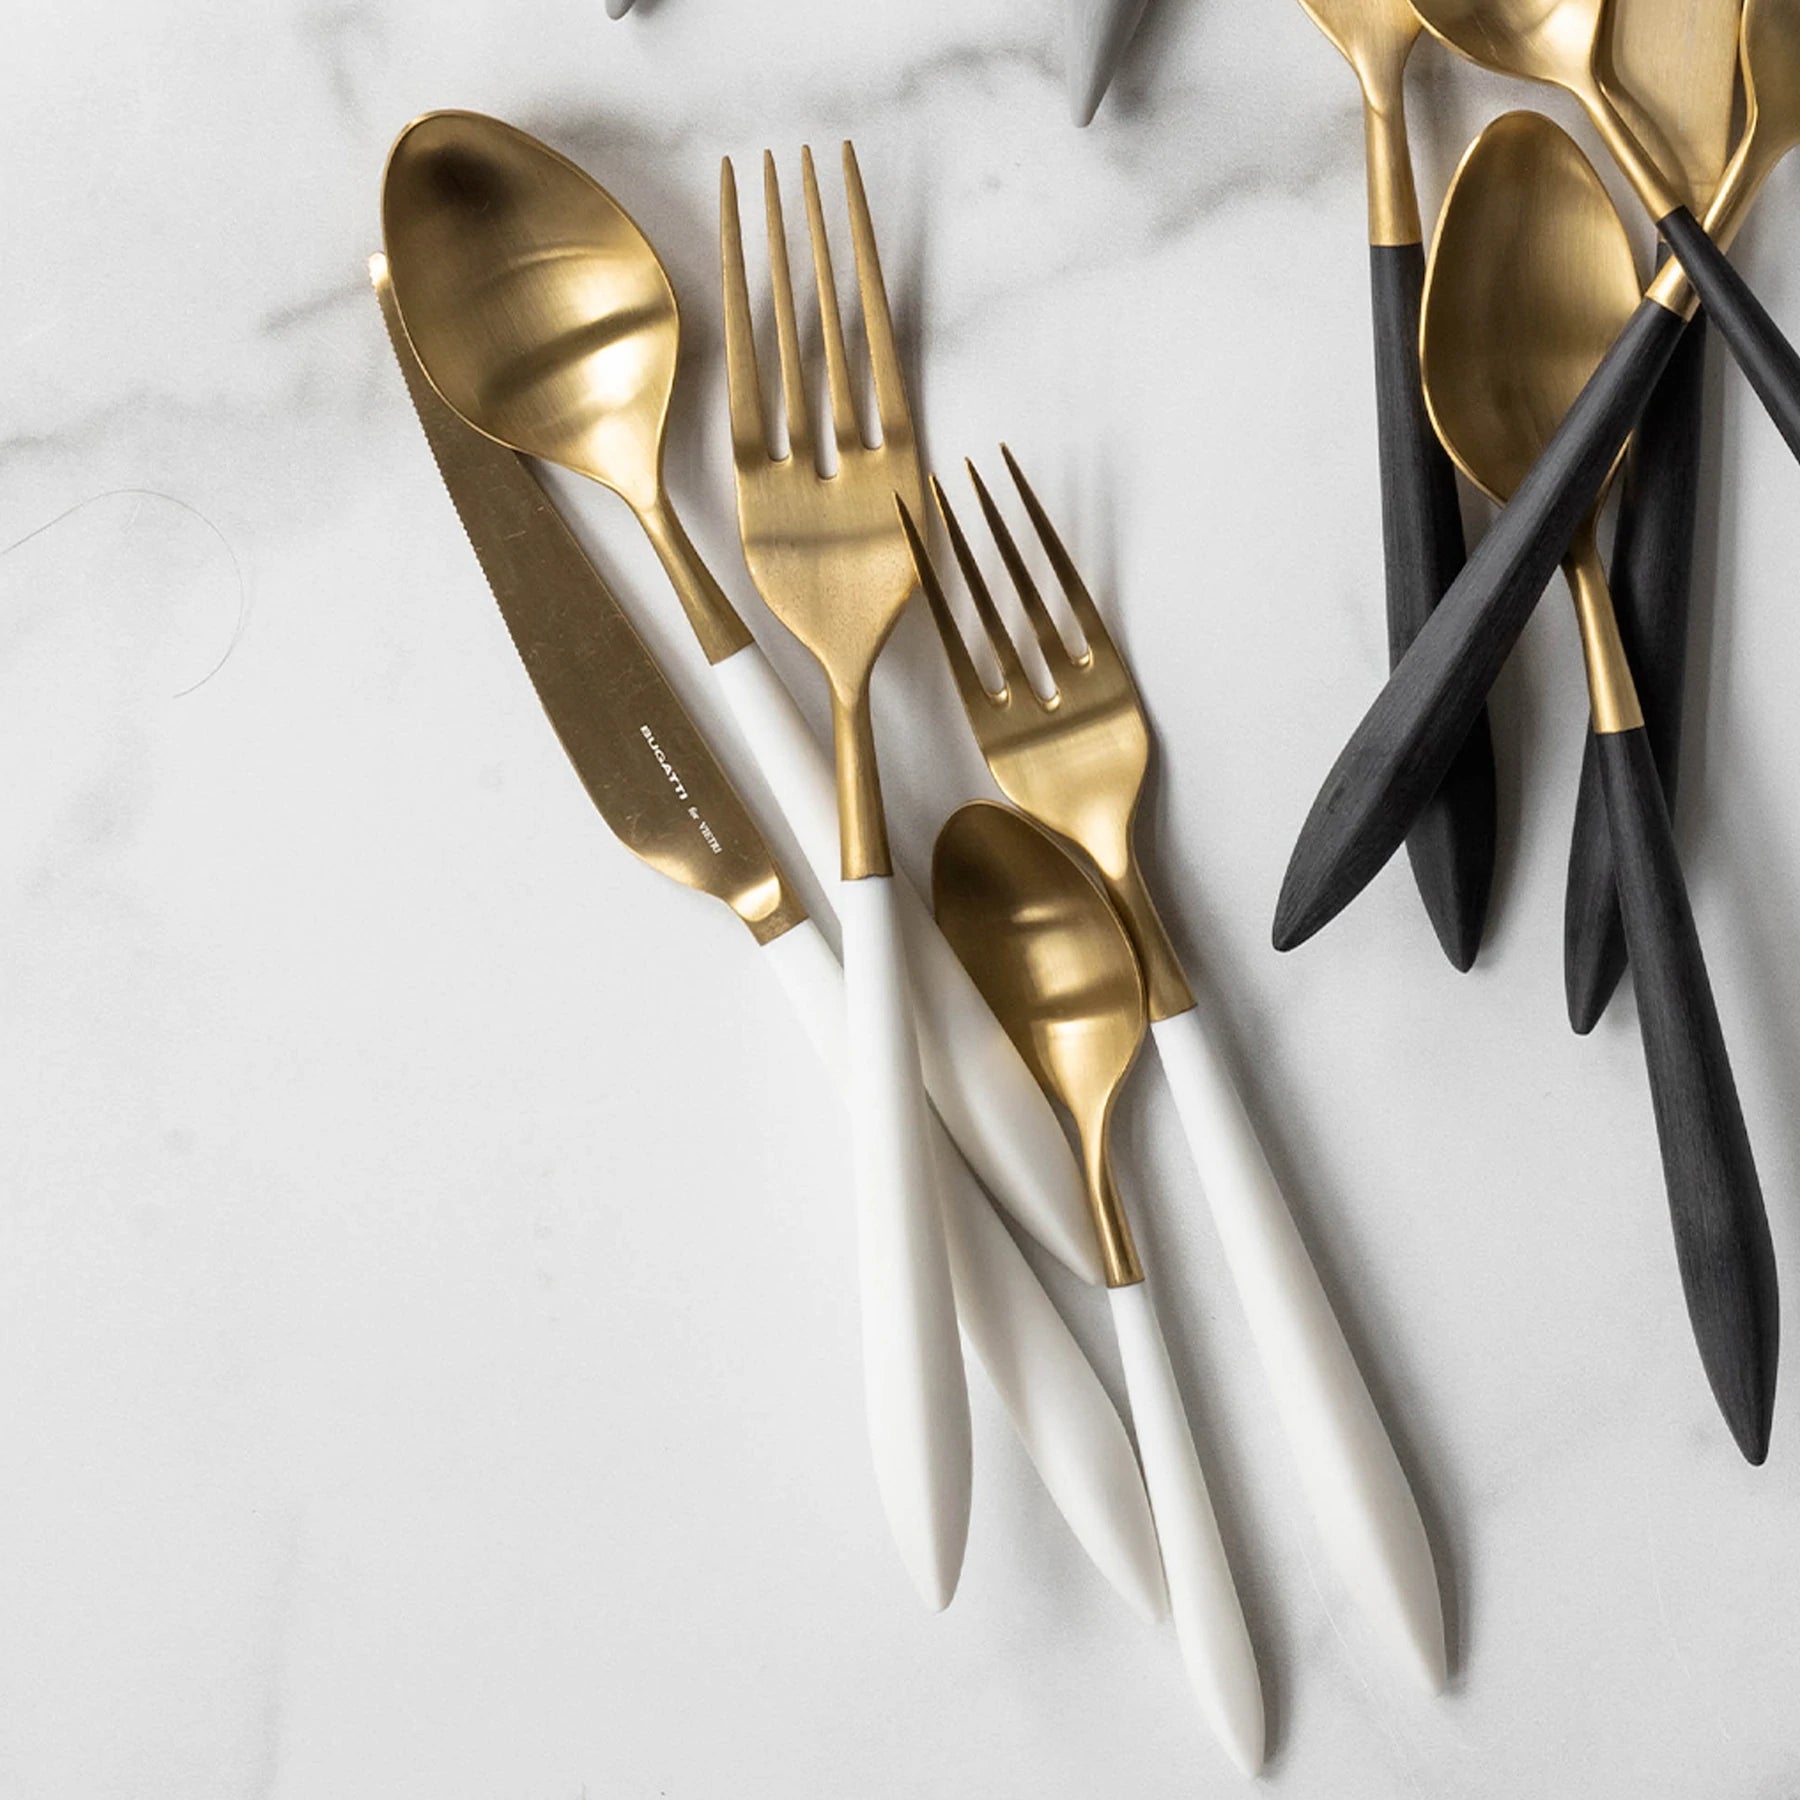 Ares Oro & White Five Piece Place Setting